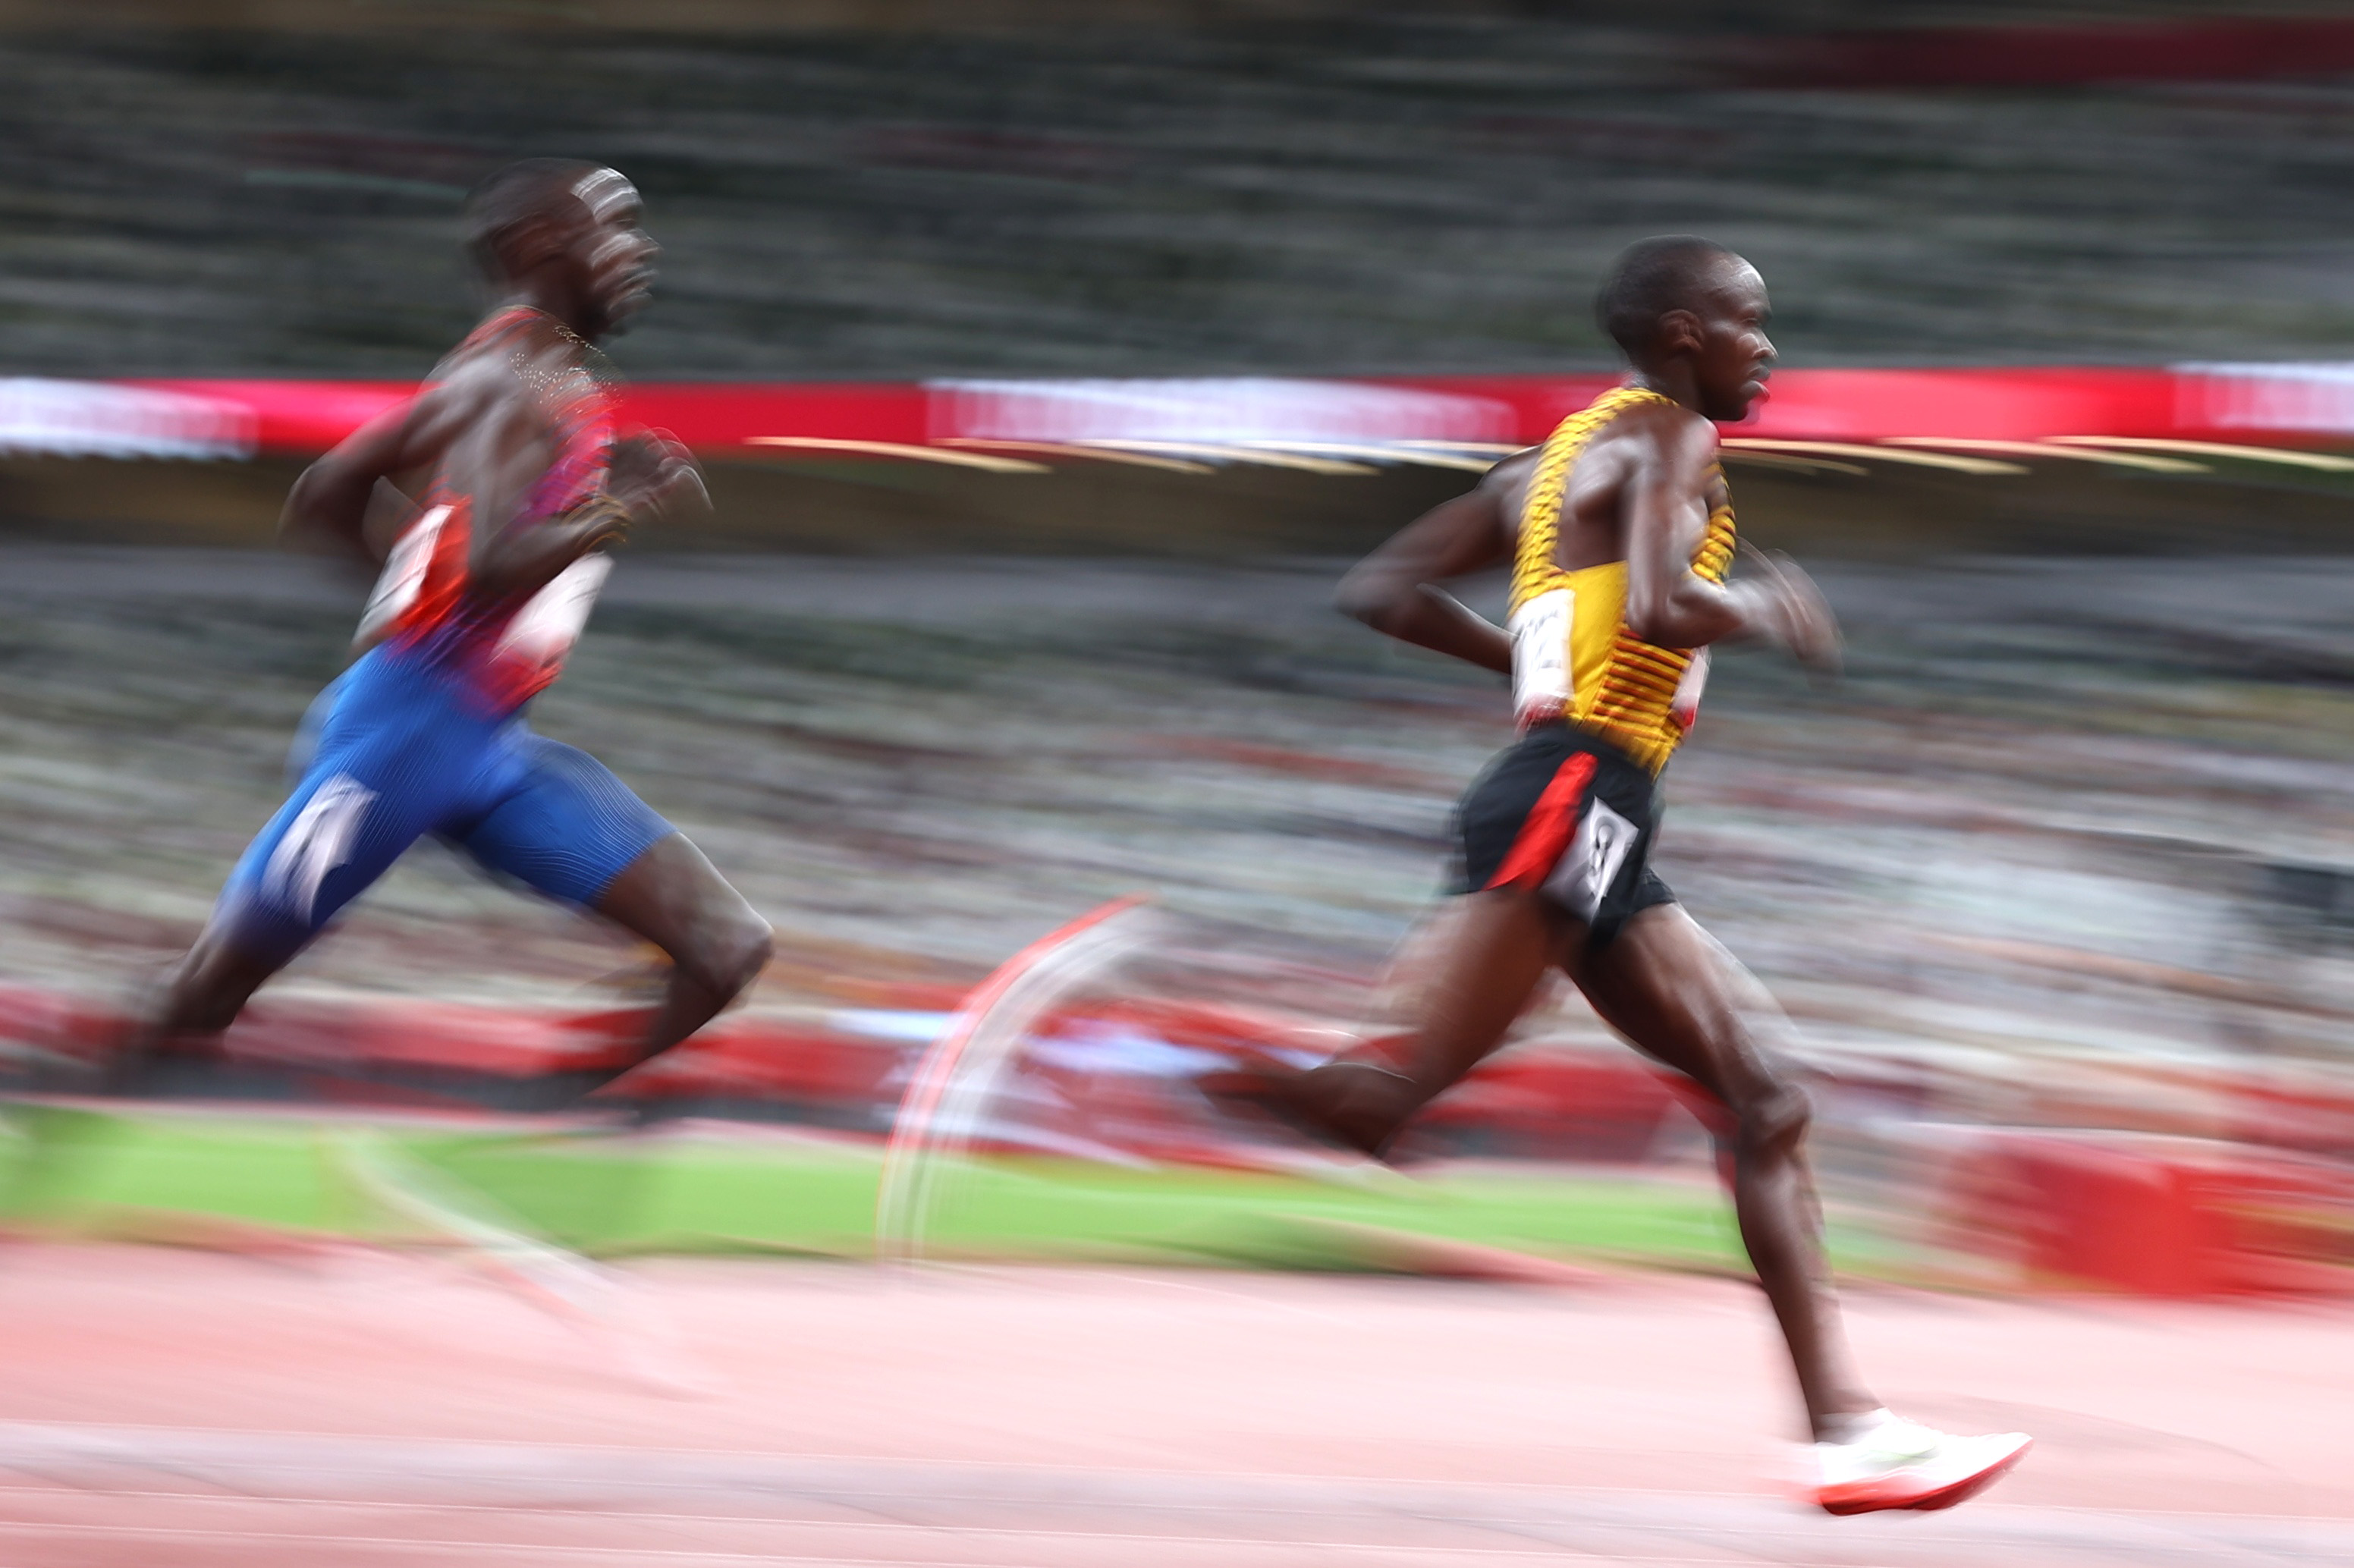 Tokyo 2020 Olympics - Athletics - Men's 5000m - Final - Olympic Stadium, Tokyo, Japan - August 6, 2021. Jacob Kiplimo of Uganda in action with Paul Chelimo of the United States REUTERS/Lucy Nicholson